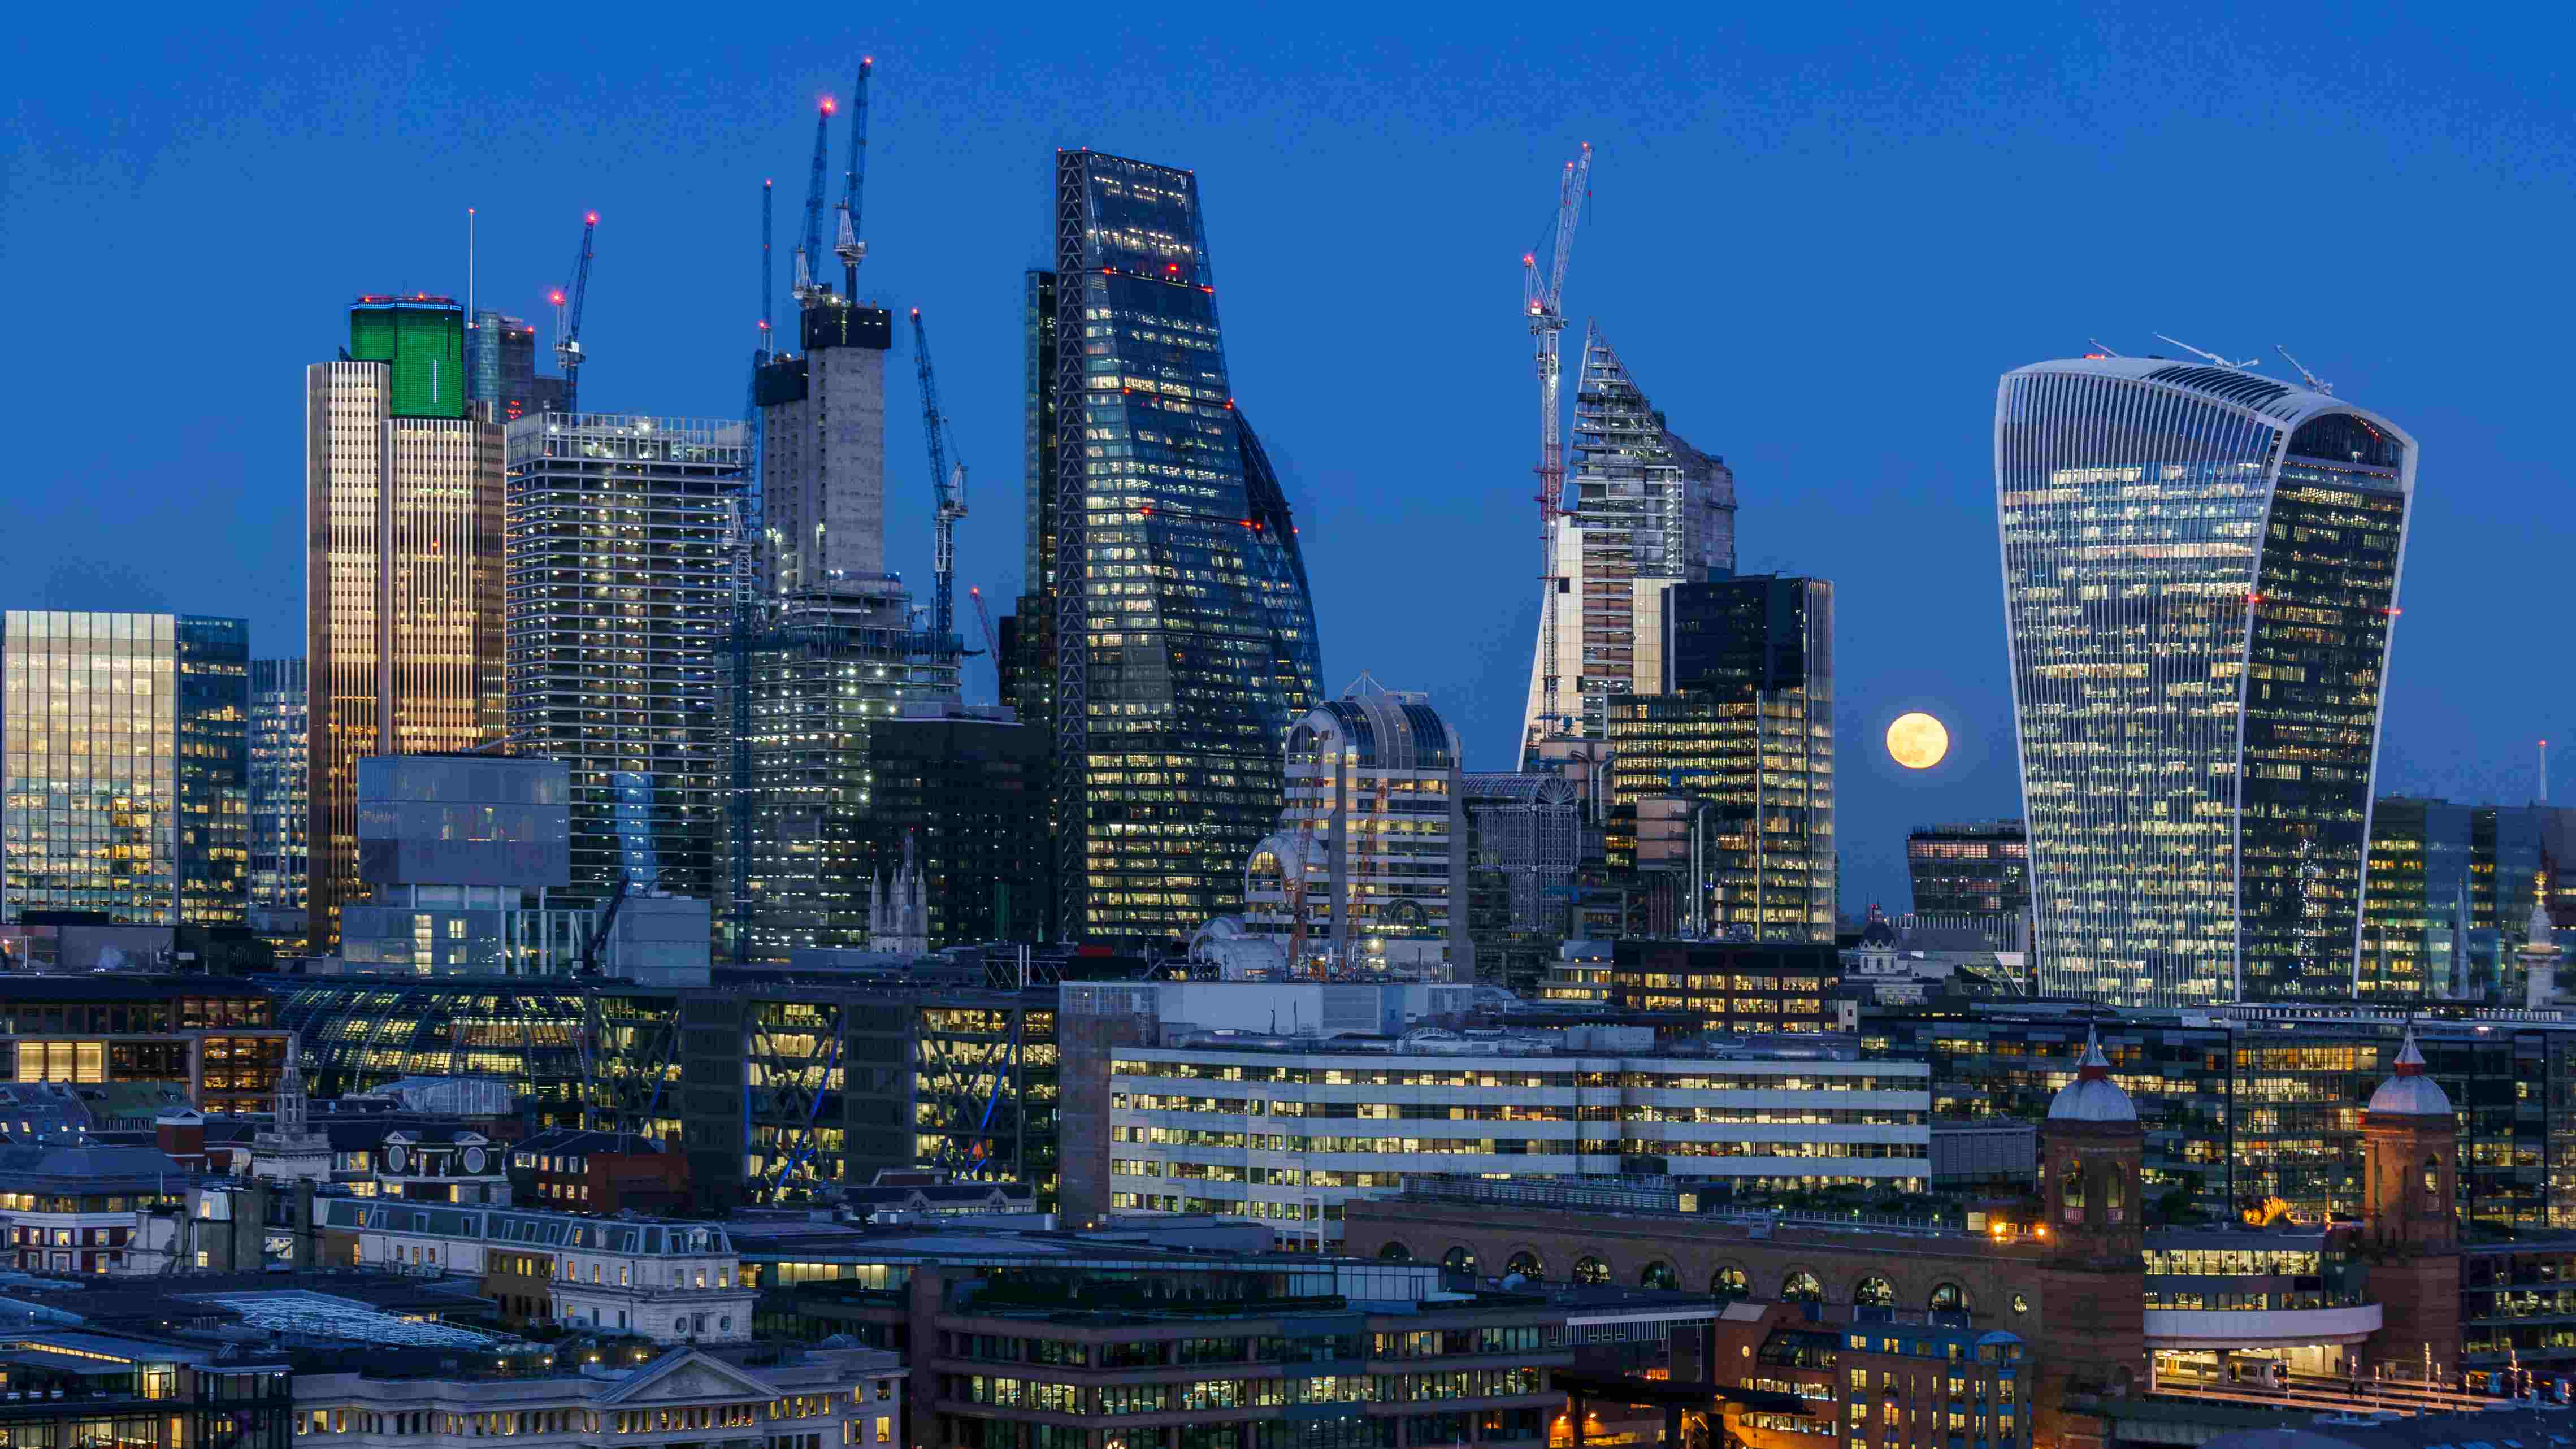 Images Wikimedia Commons/29 Colin Super_moon_over_City_of_London.jpg